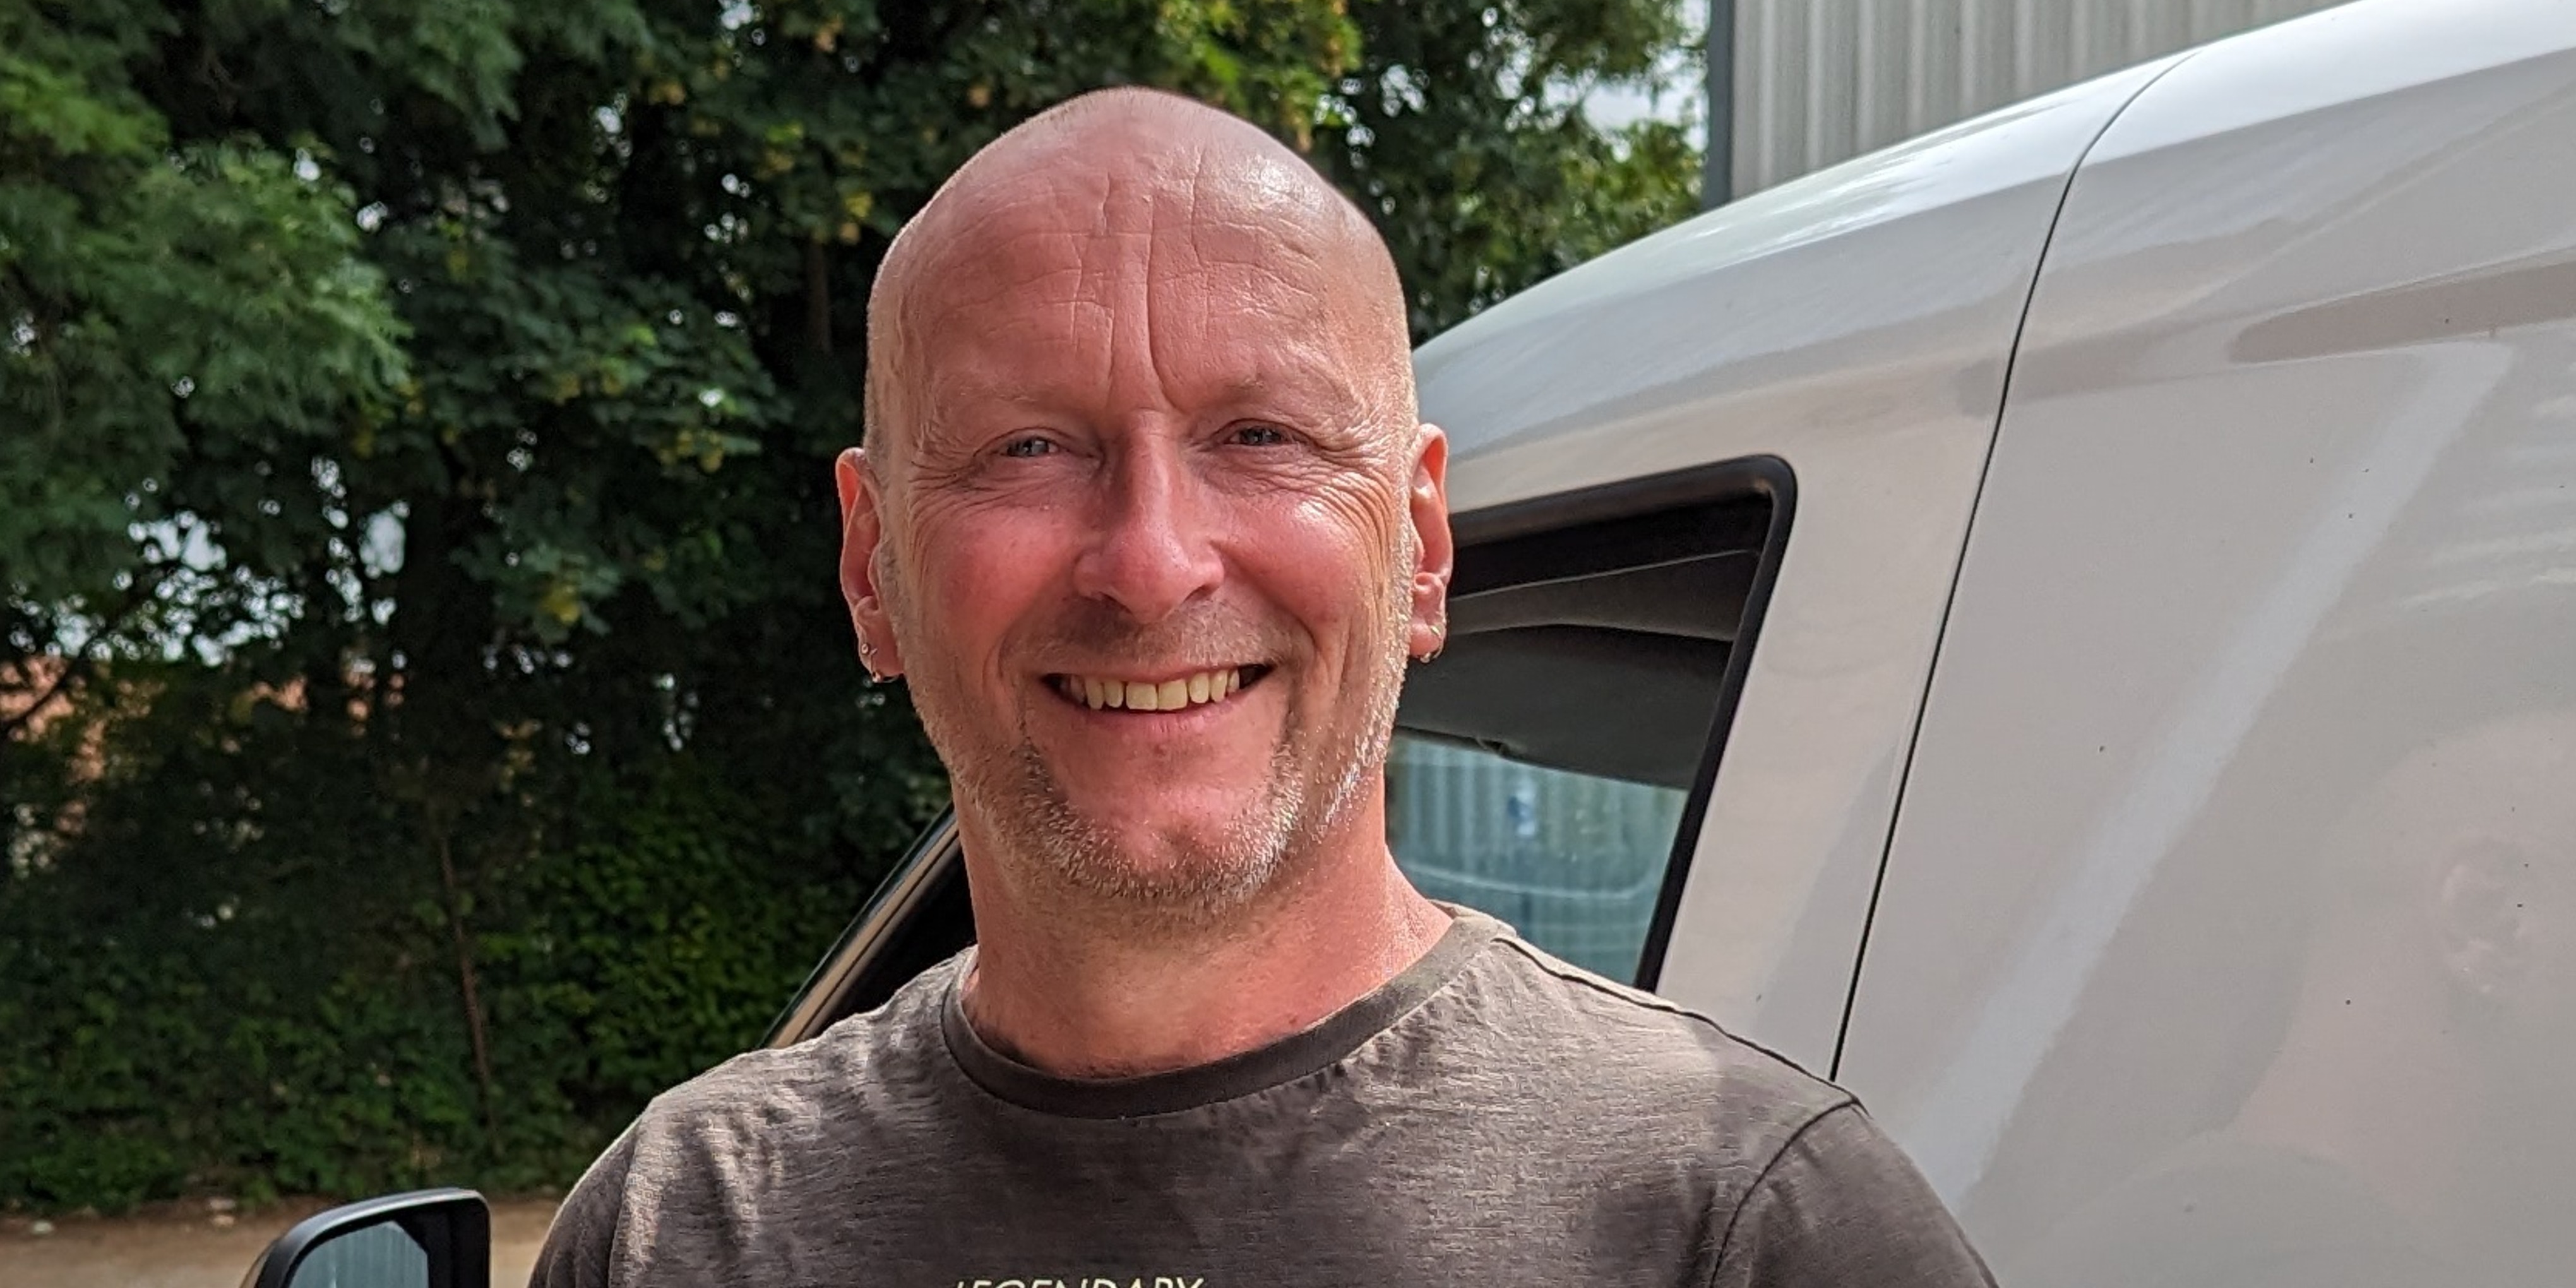 Jason*Jason came to REACH in a time of personal crisis and was given the opportunity to turn his own life around. In turn, he is able to give support to others through volunteering.